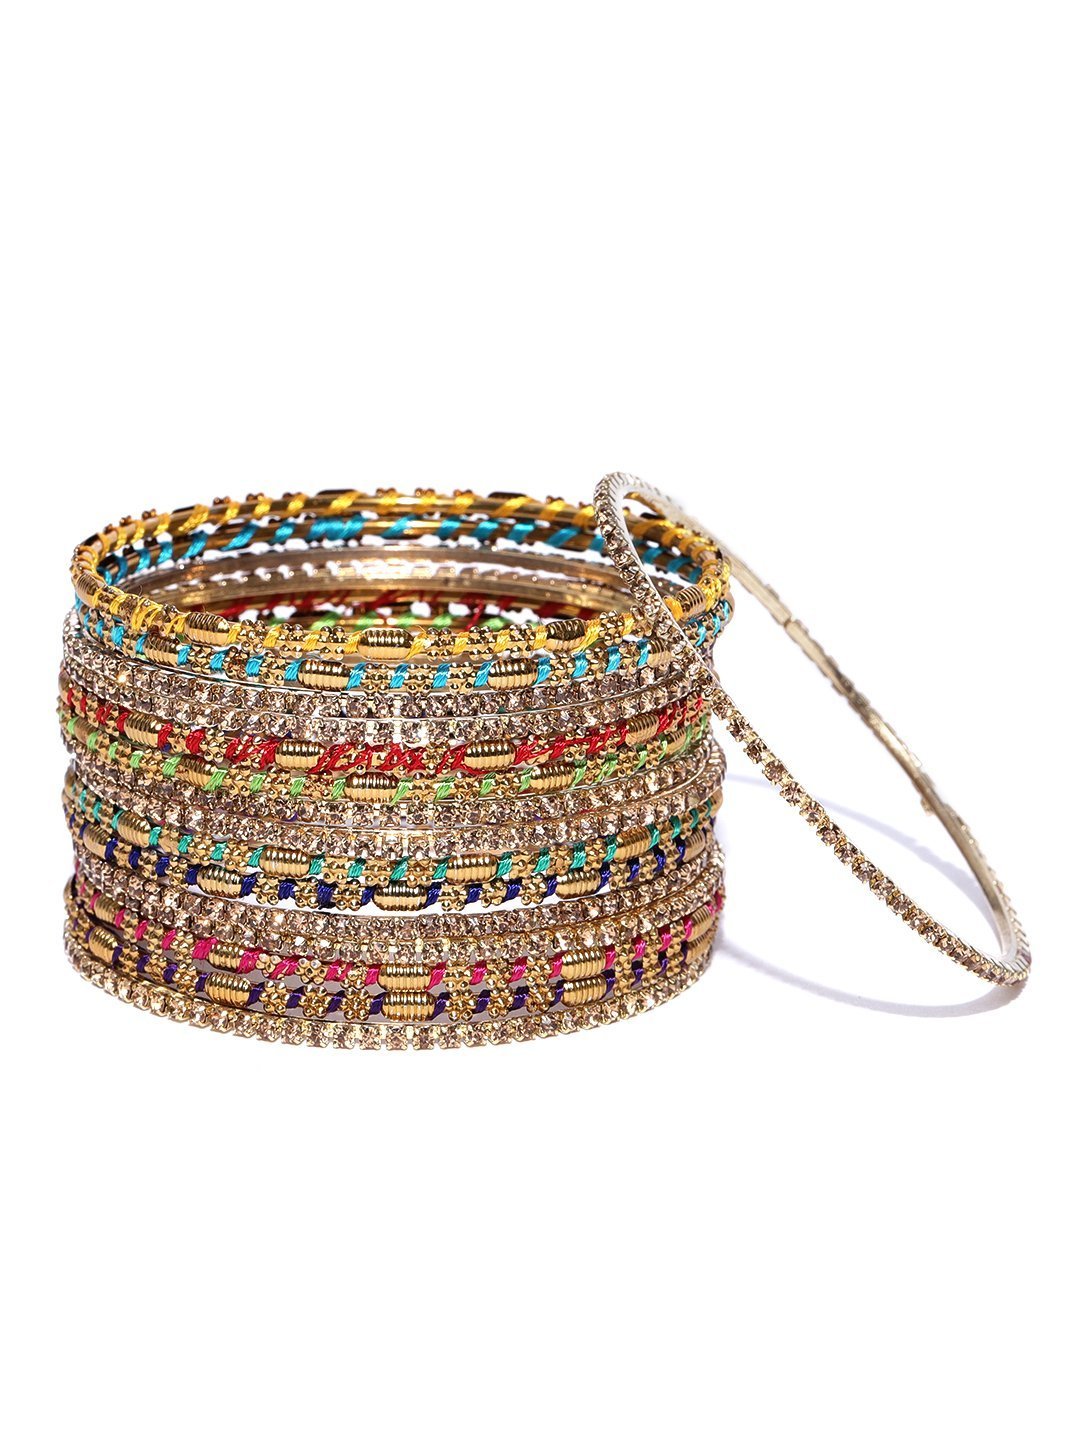 Women's Set Of 16 Multicolour Thread Work And Stones Studded Bangles - Priyaasi